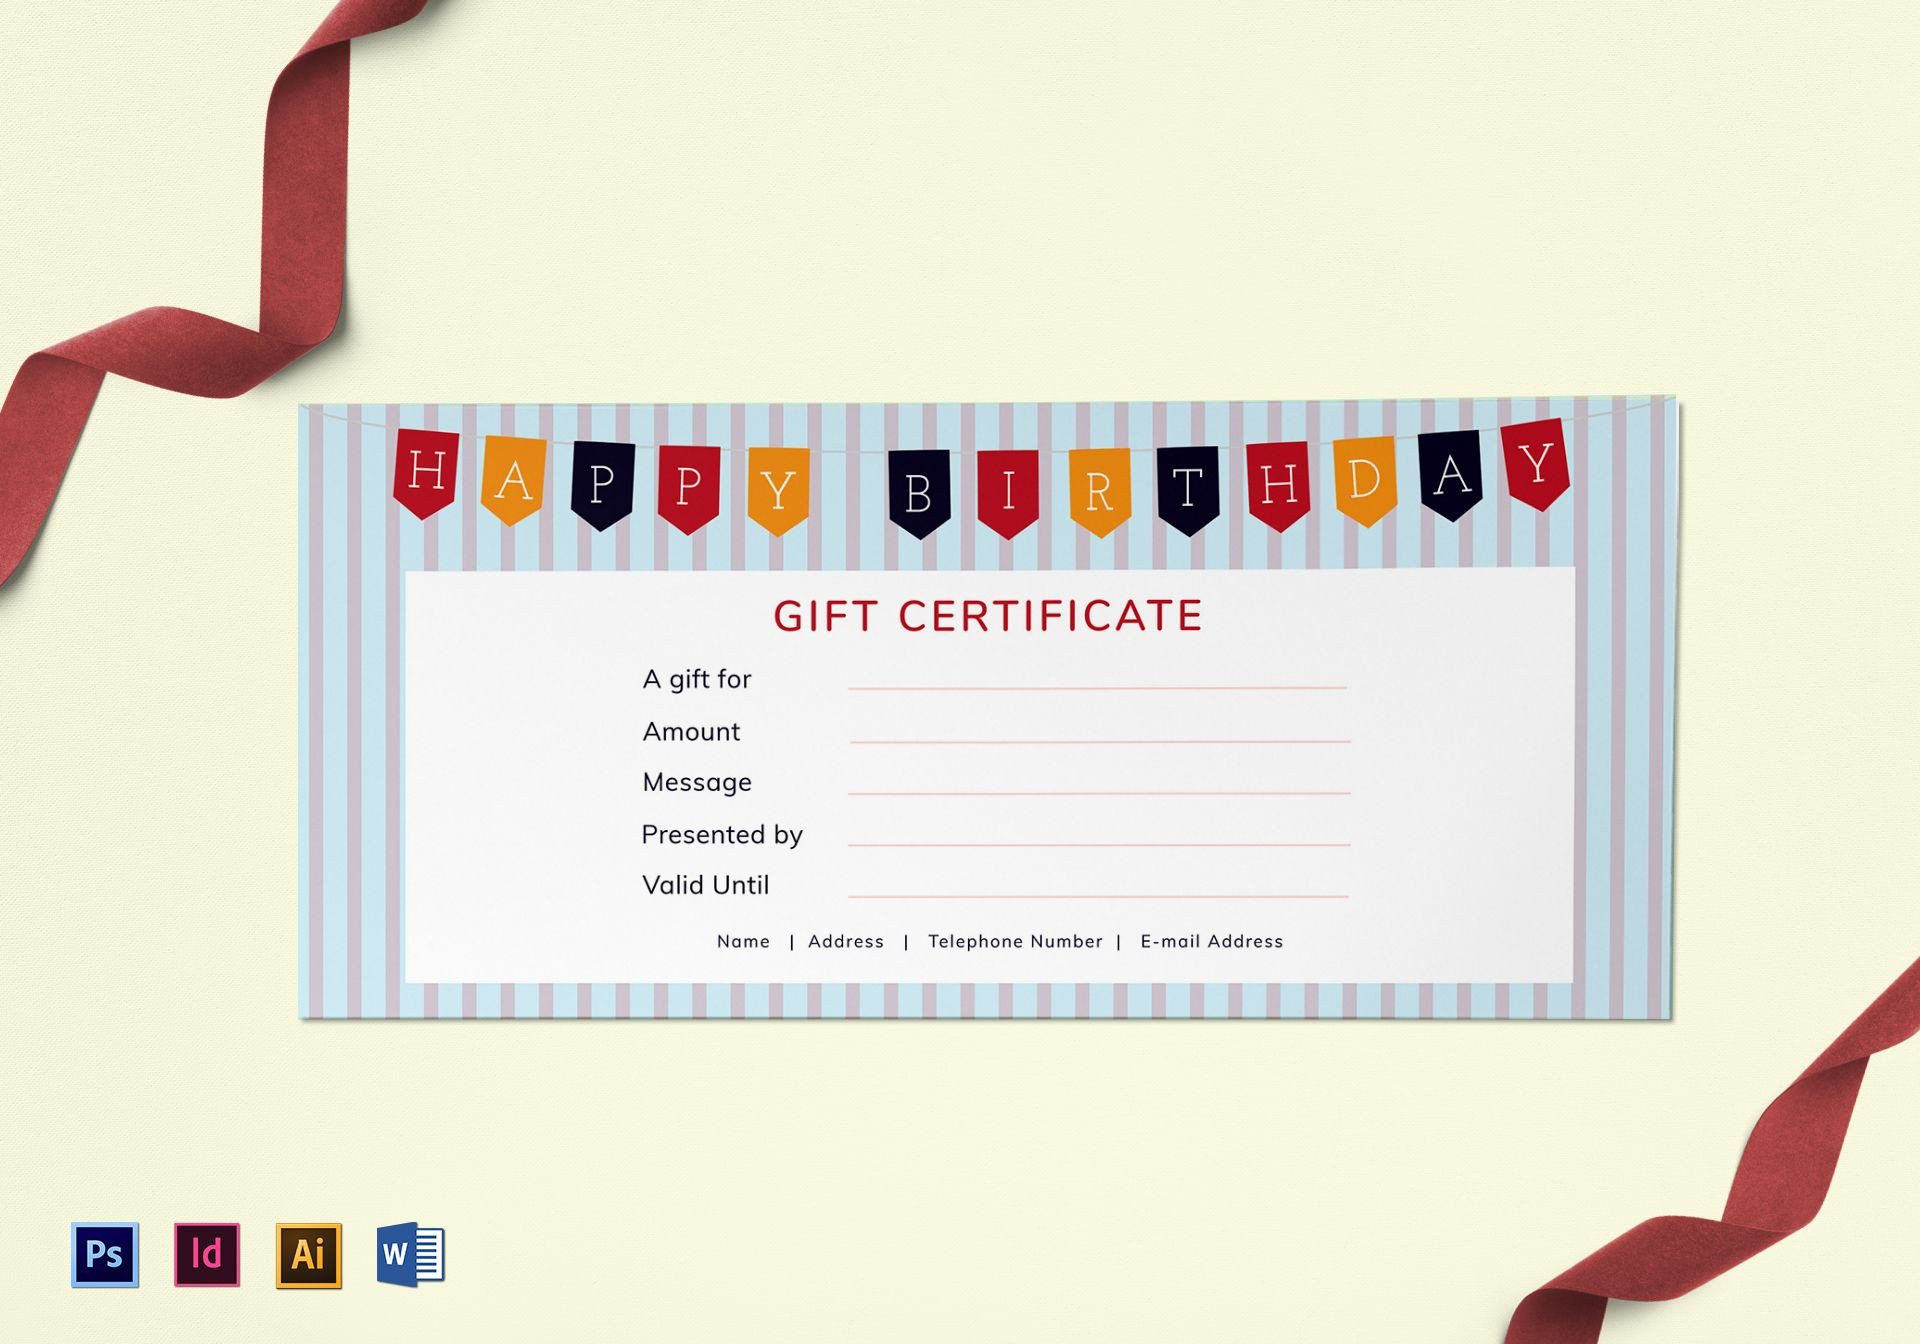 Best Gift Certificate Ideas
 Happy Birthday Gift Certificate Design Template in PSD